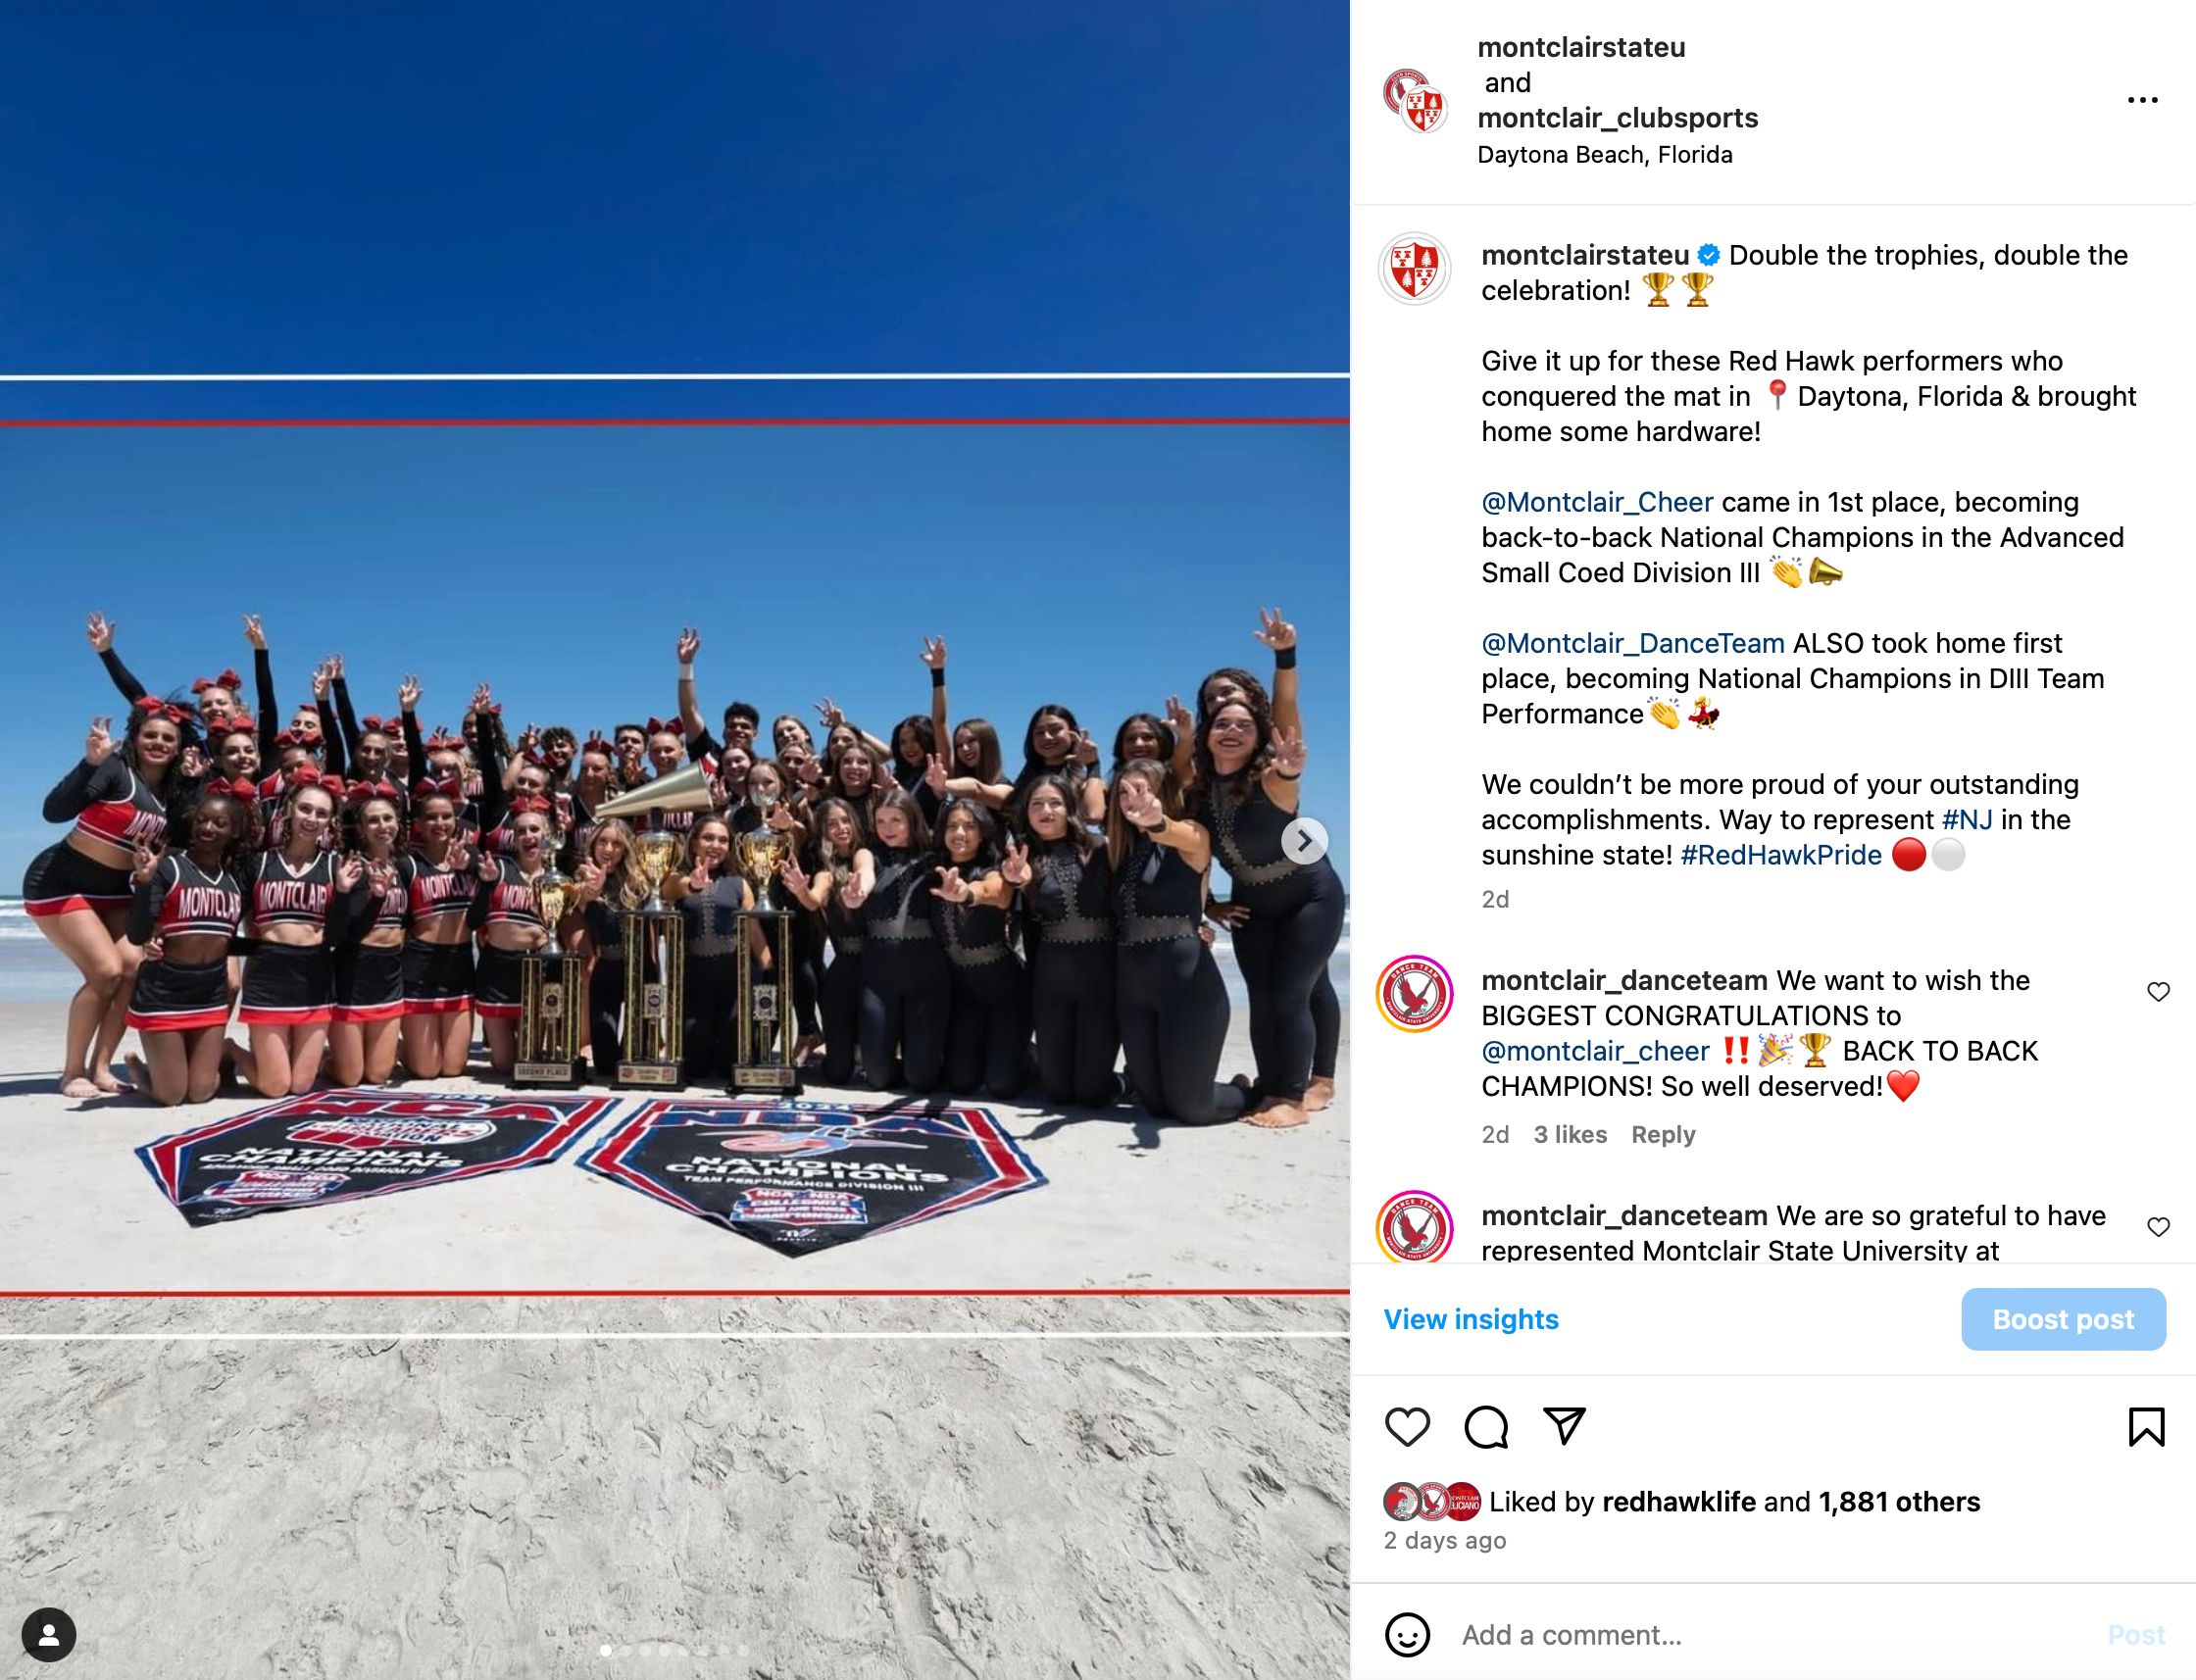 Instagram post showing Montclair cheer and dance teams on a sunny beach posing with trophies